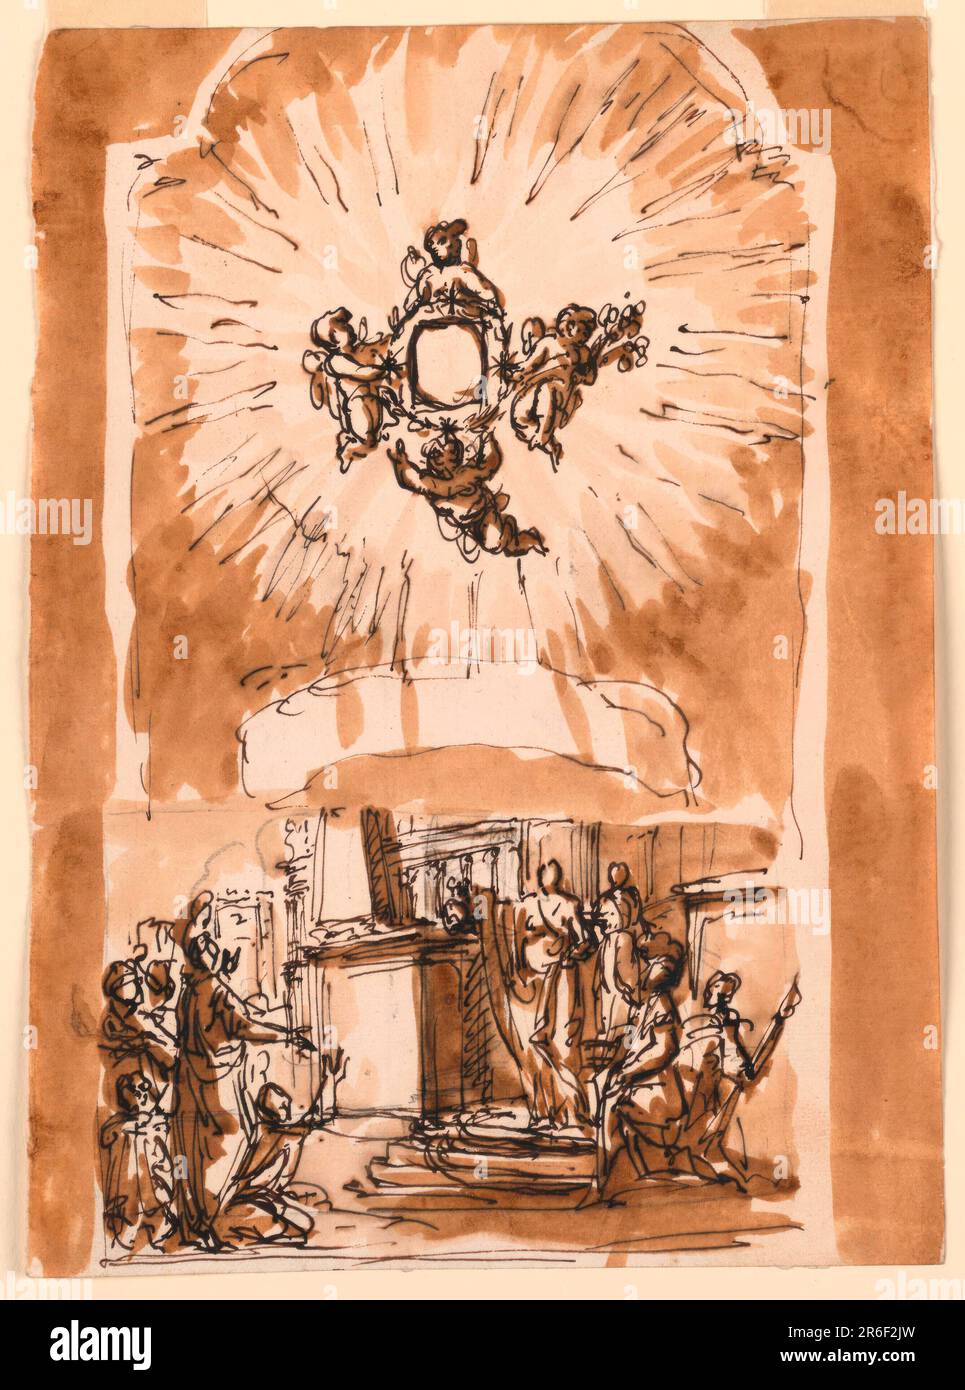 Four flying angels hold a wreath which surrounds the frame of the painting. It forms the center of a glory of rays beneath which is a paper scroll. Beneath, a woman in classical attire is shown putting upon or talking from a pedestal a pitcher. A crowd implores, or thanks her. Architectural setting, the upper part of which is not shown. Colored background. Pen and brown ink, brush and brown wash, graphite. Date: ca. 1773-1774. Museum: Cooper Hewitt, Smithsonian Design Museum. Stock Photo